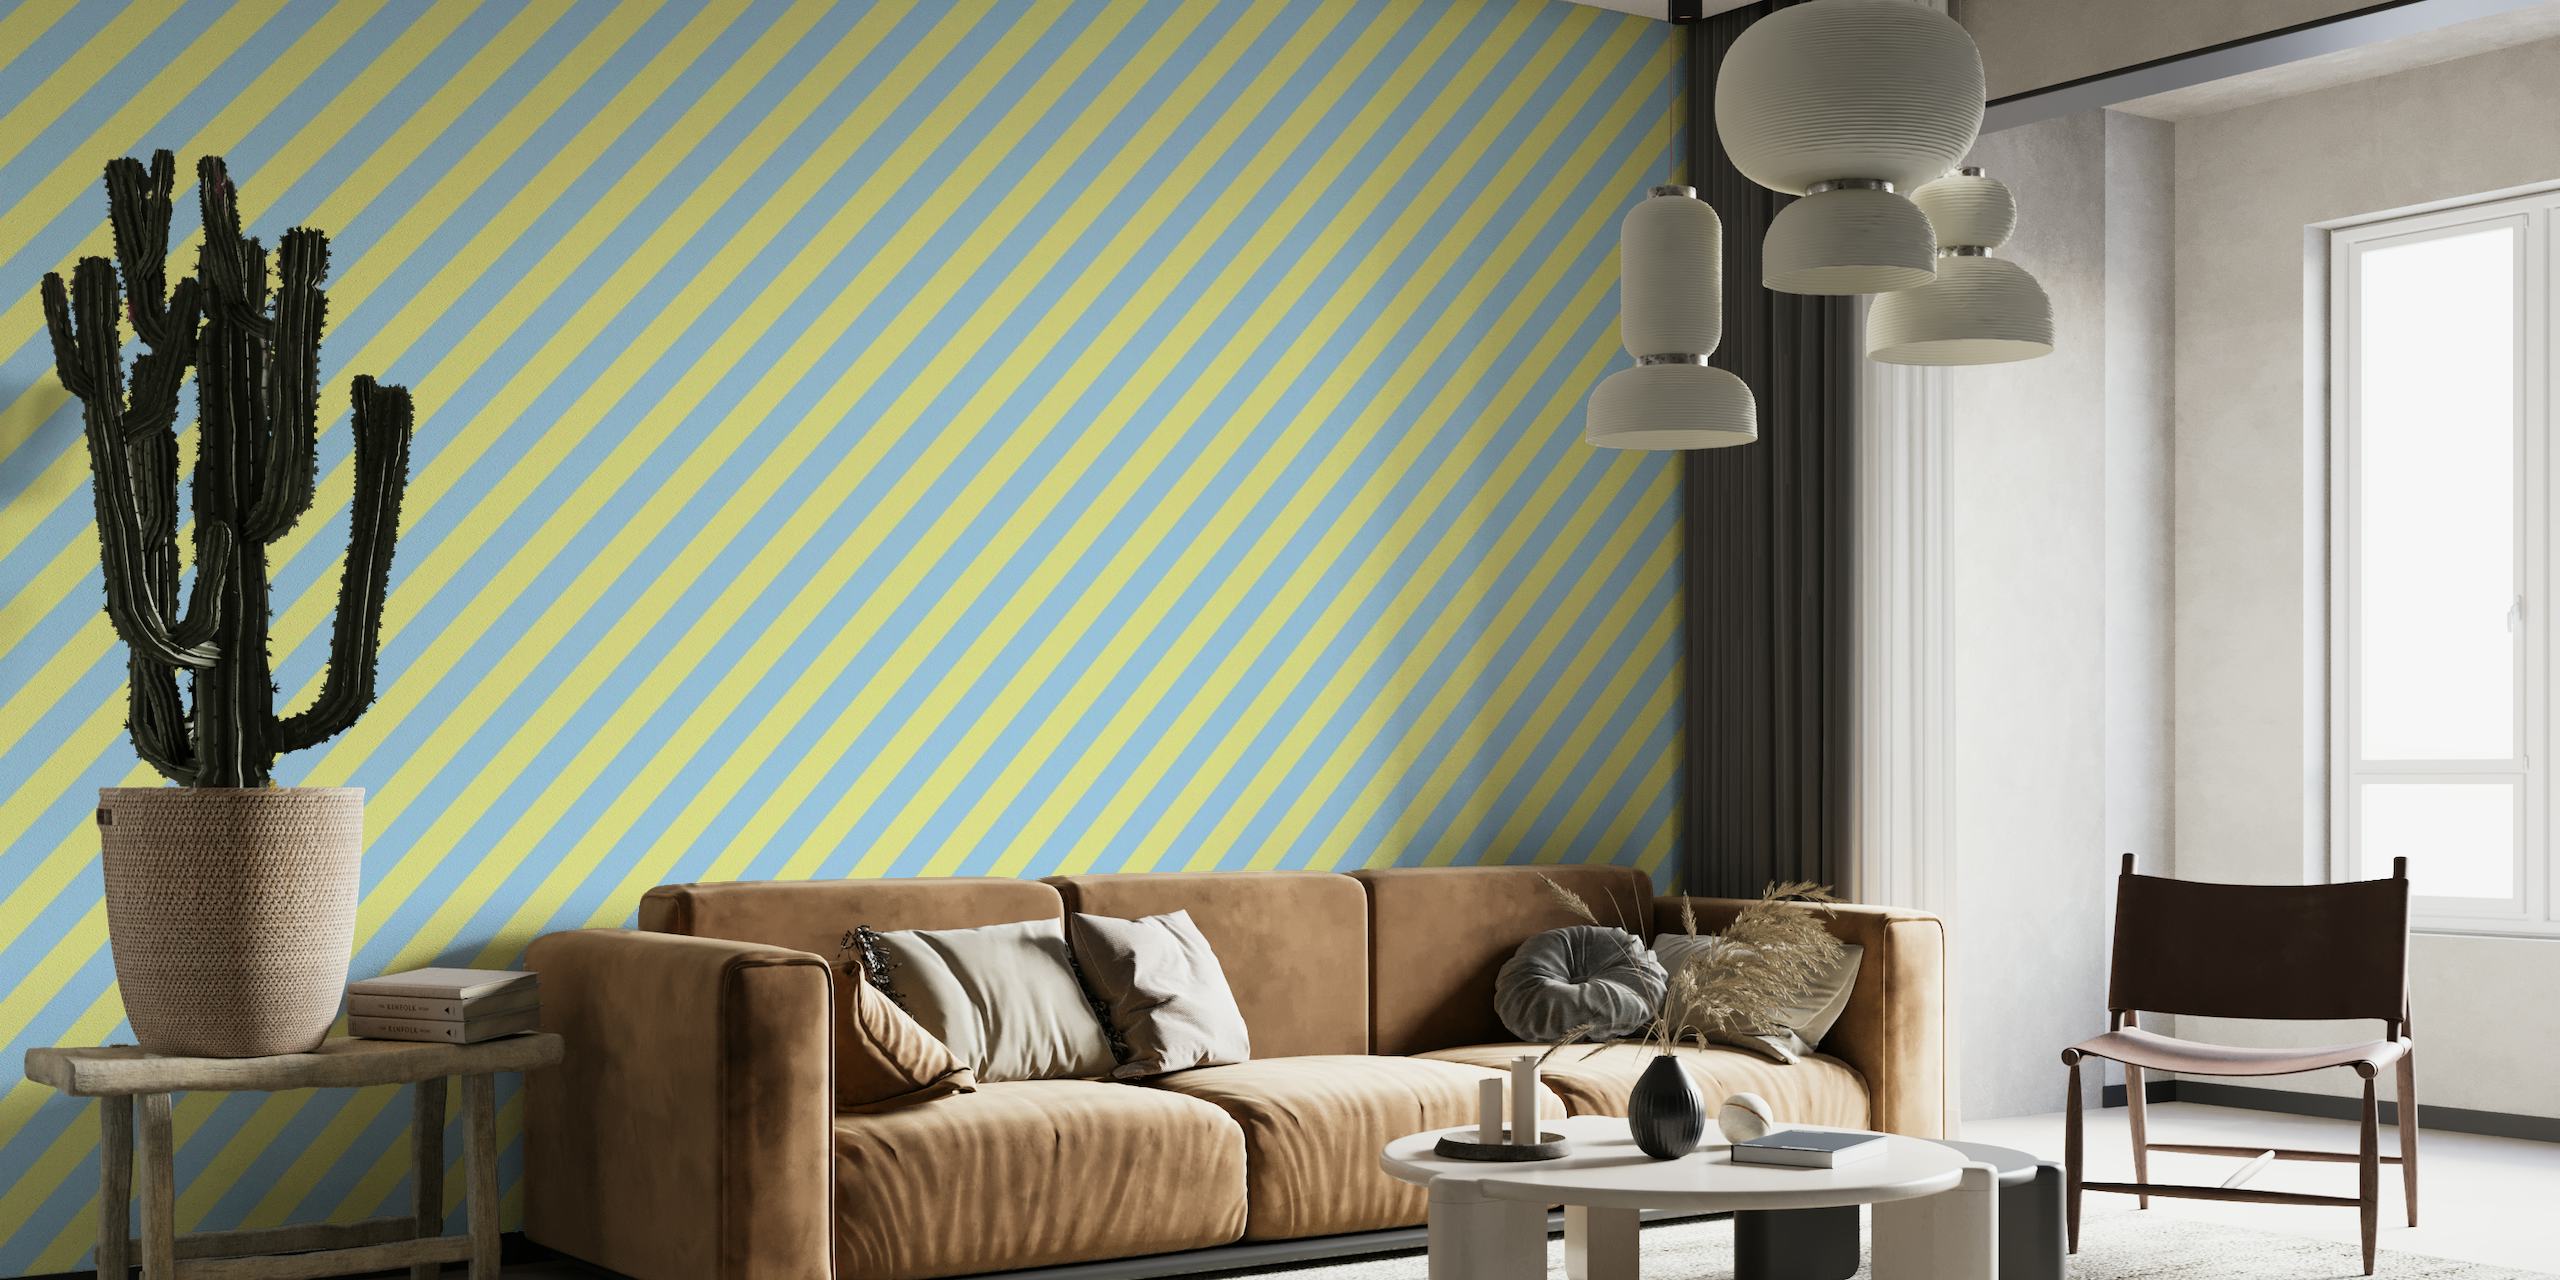 Blue and yellow diagonal striped wall mural creating a bold and vibrant backdrop